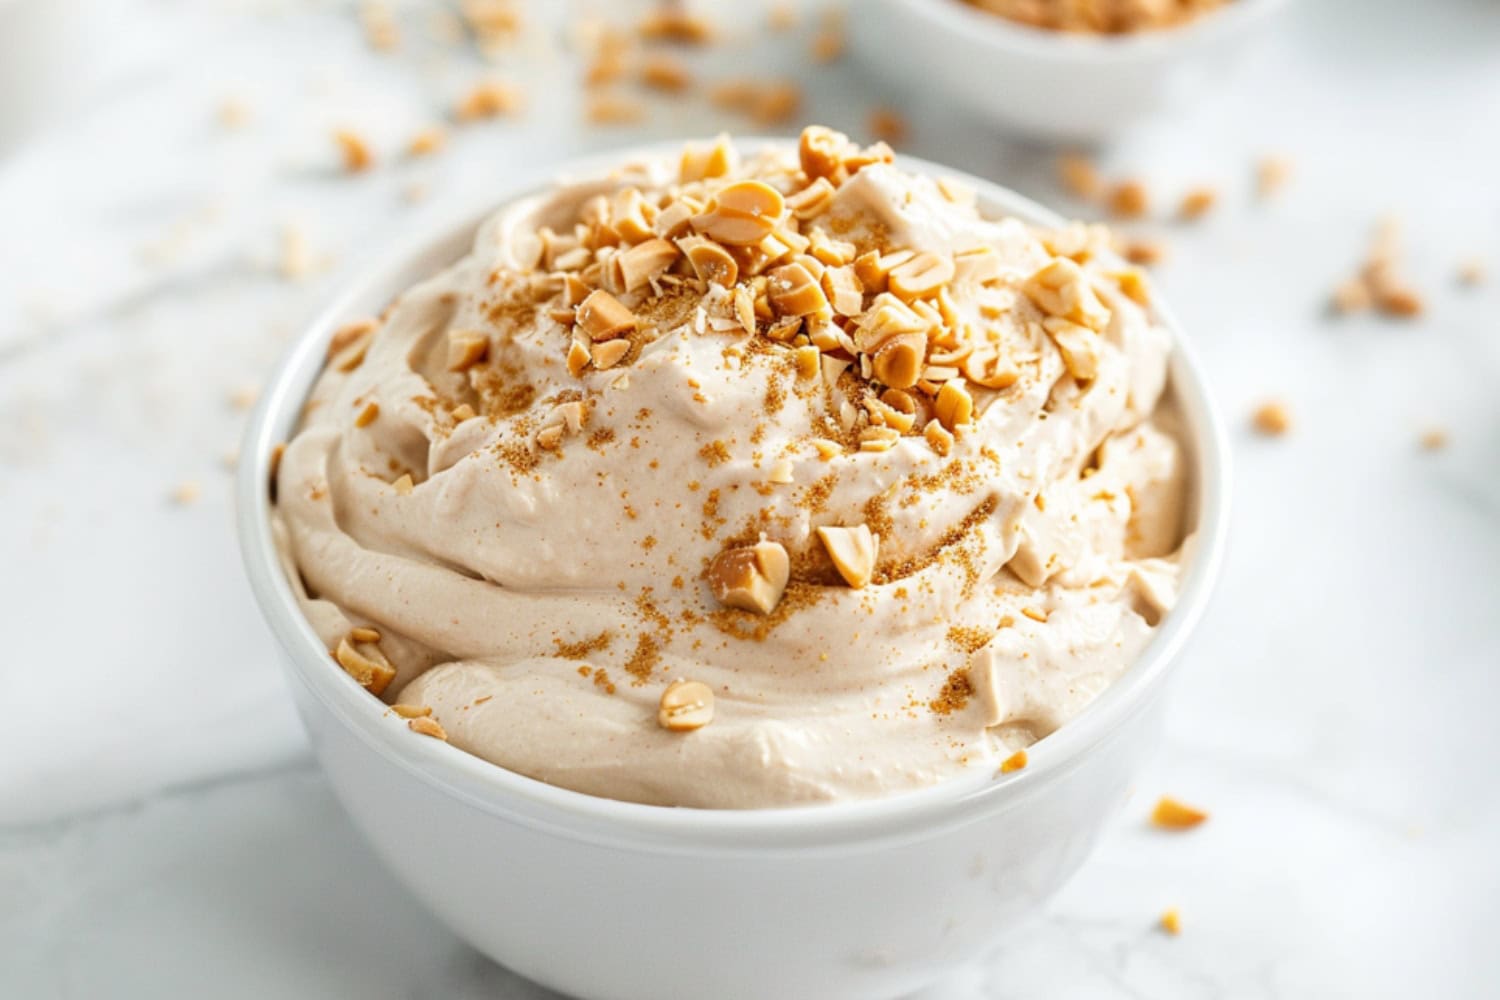 Fluffy and creamy peanut butter dip in a white bowl topped with chopped peanuts.